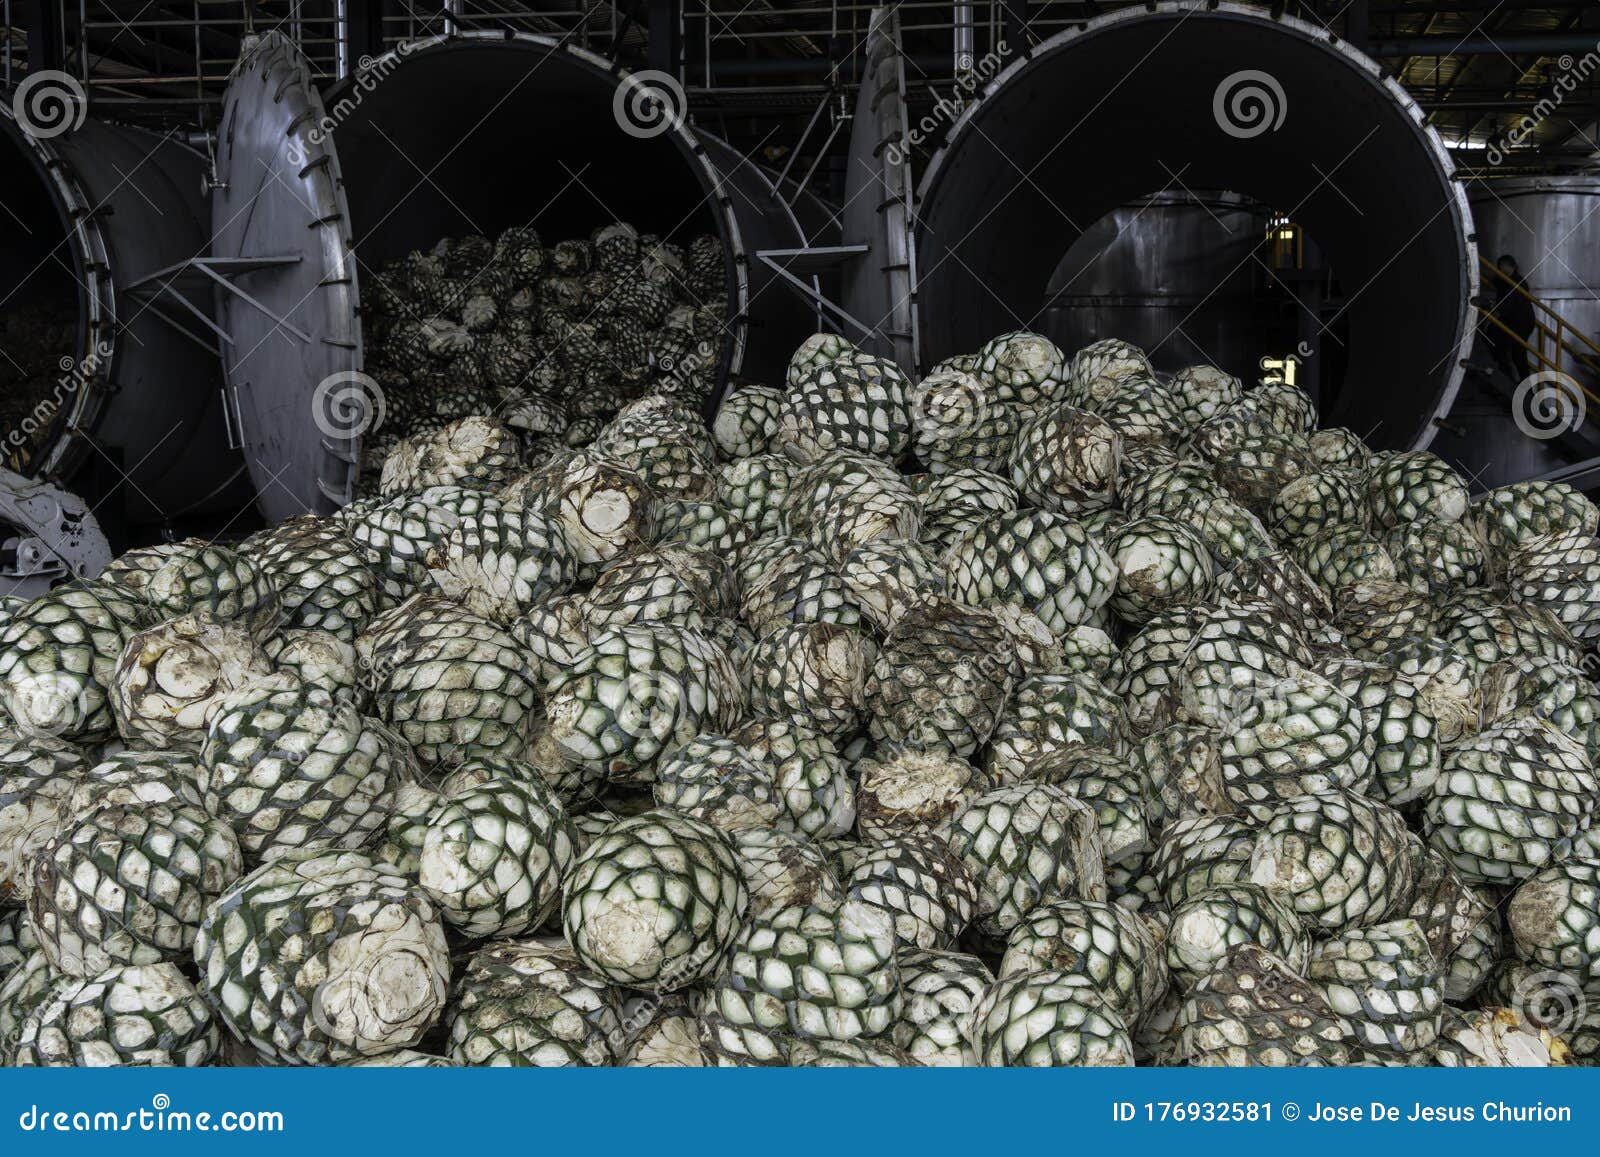 agave is very fresh to make tequila at the factory.